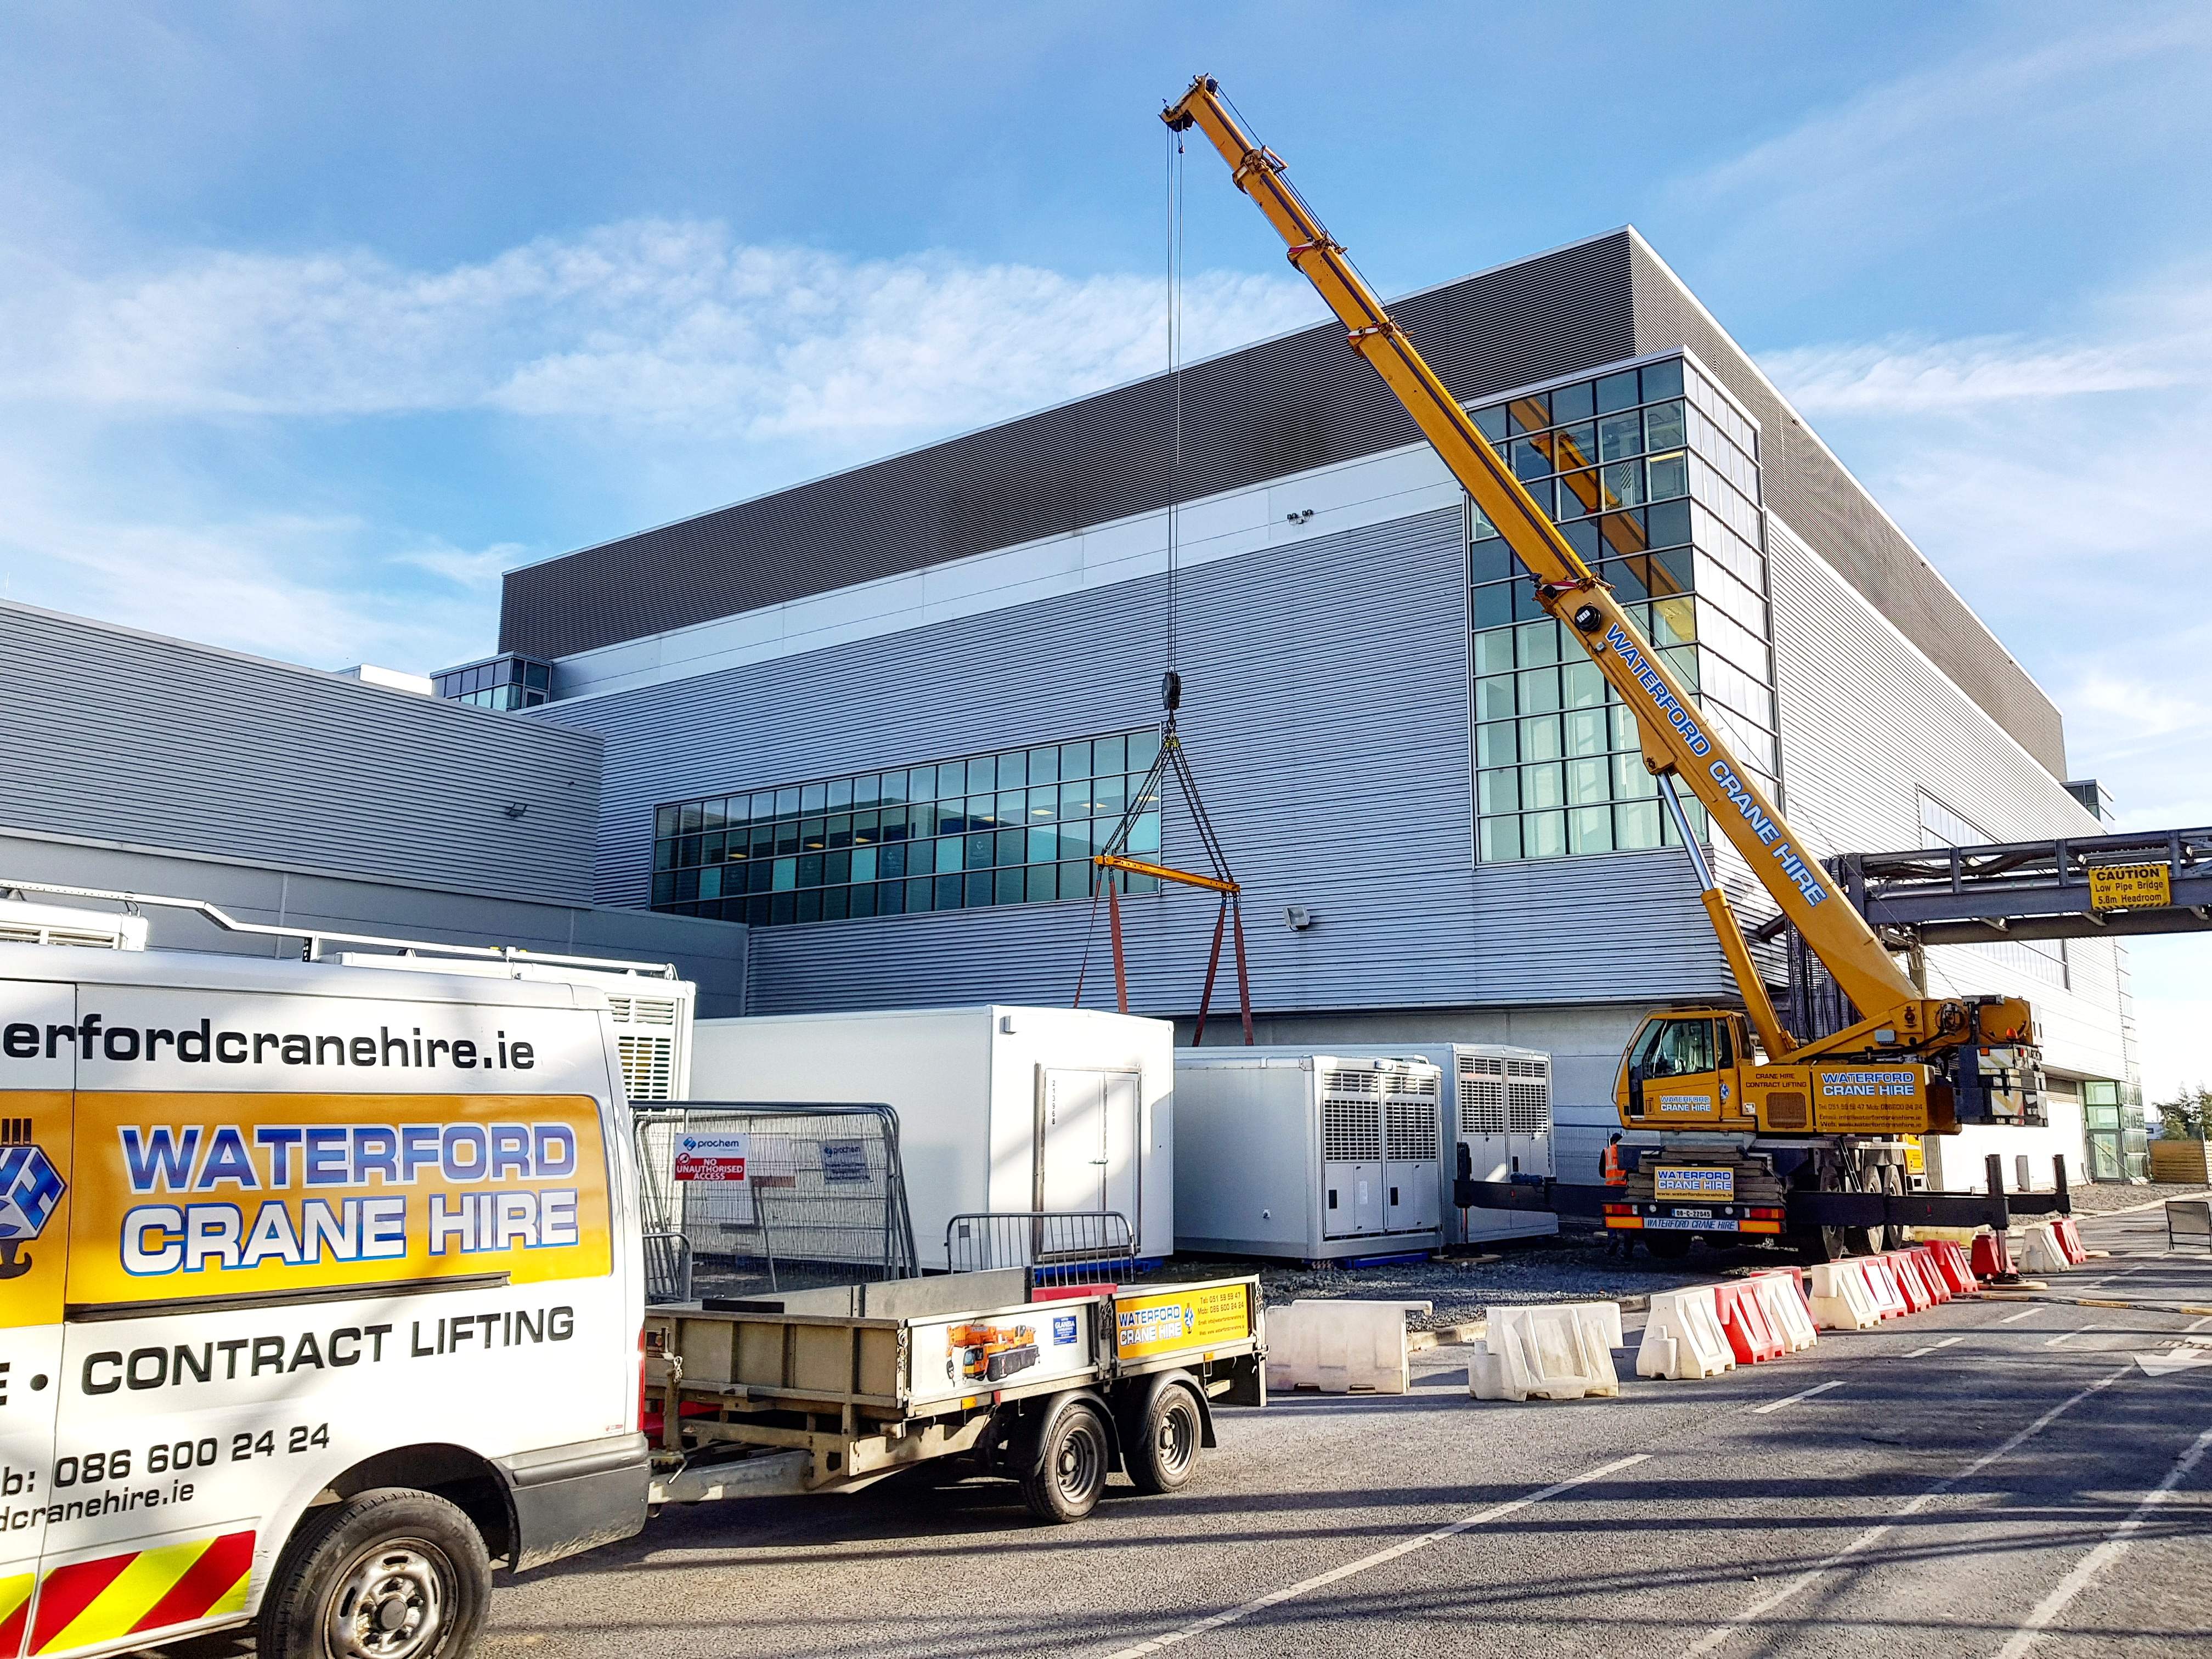 Lifting 11 tonne chiller rooms into position under contract lift conditions at Sanofi, Waterford